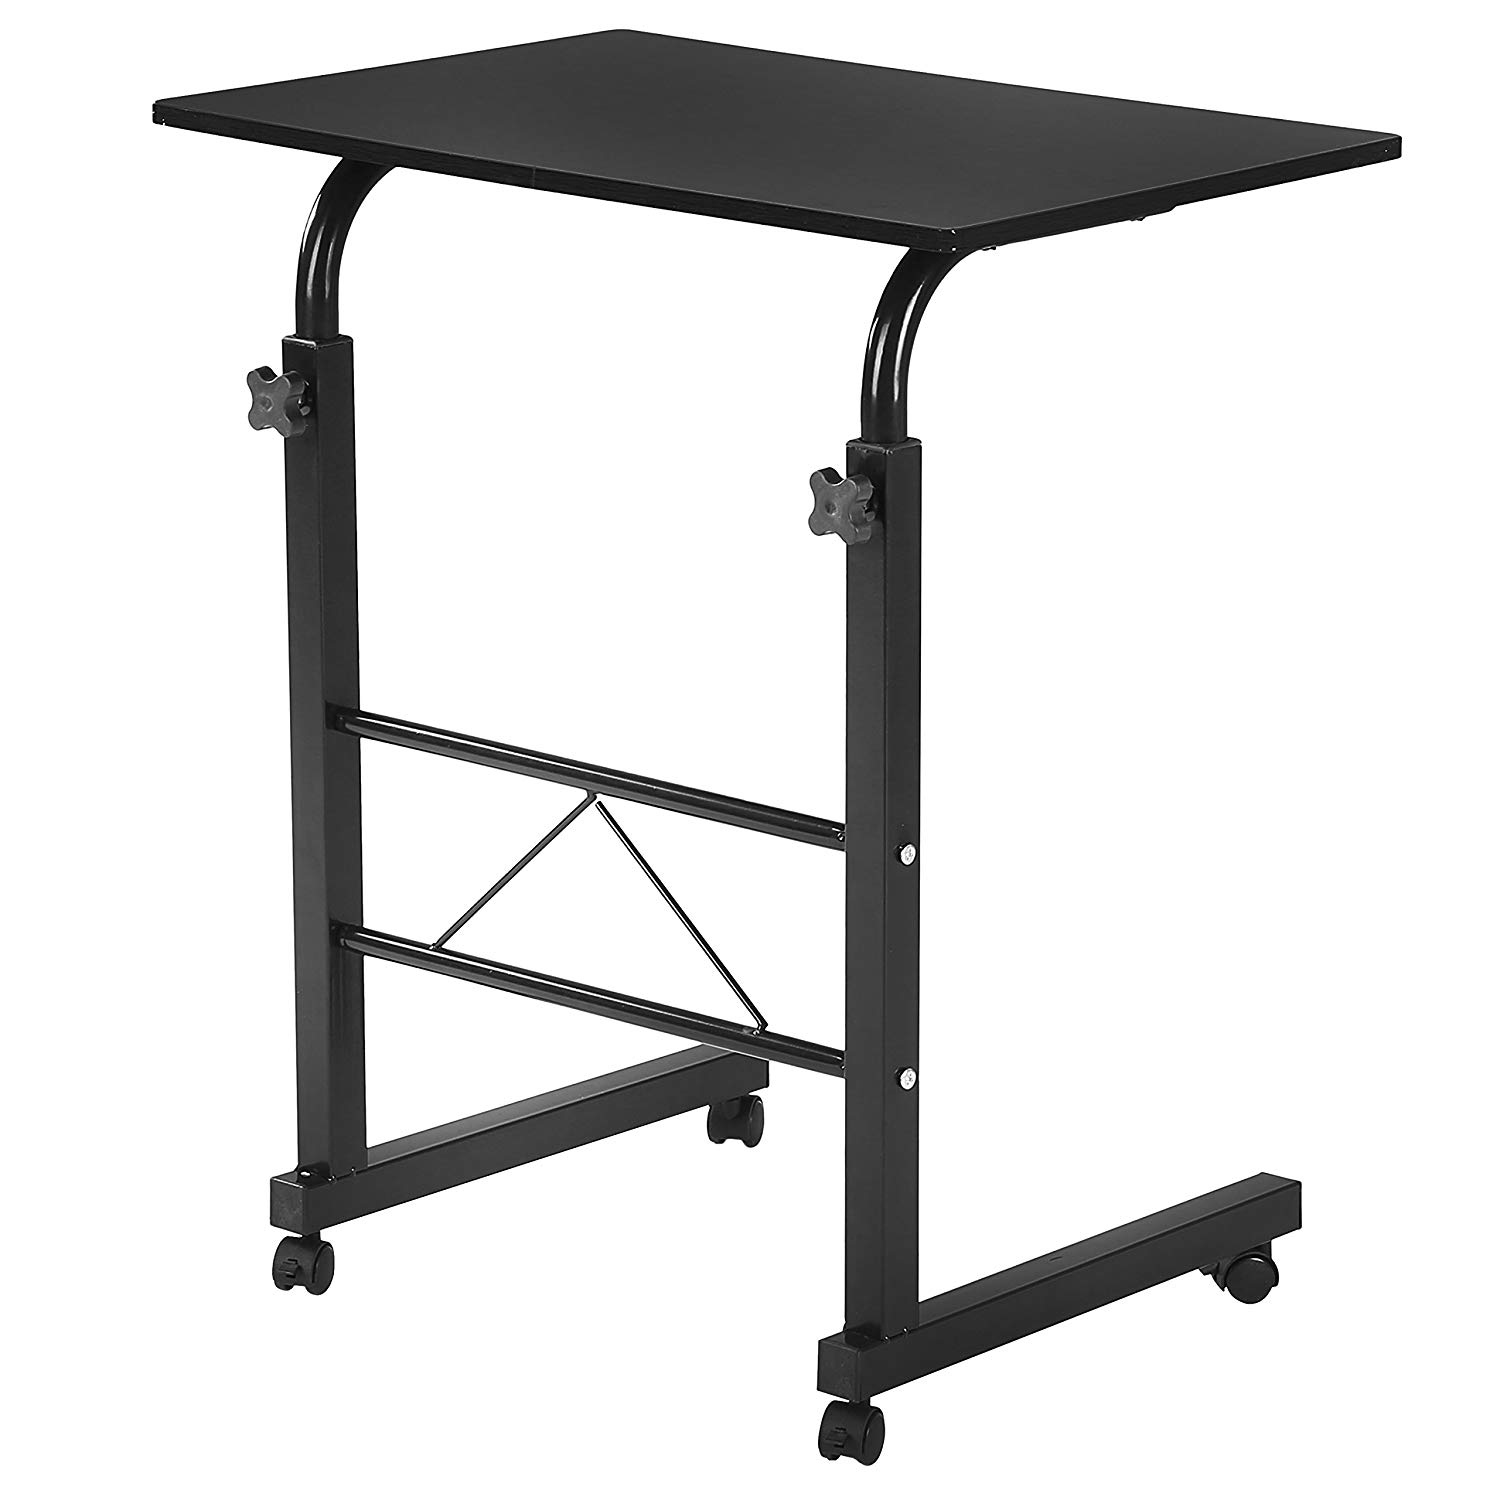 Small Laptop Desk, 360 Degree Rotation Laptop Stand for Desk, Adjustable Rustproof Computer Cart, Sturdy Notebook Desk Table Stand for Drawing, Writing, Drafting, or Doing Homework, Q2789 - image 2 of 7